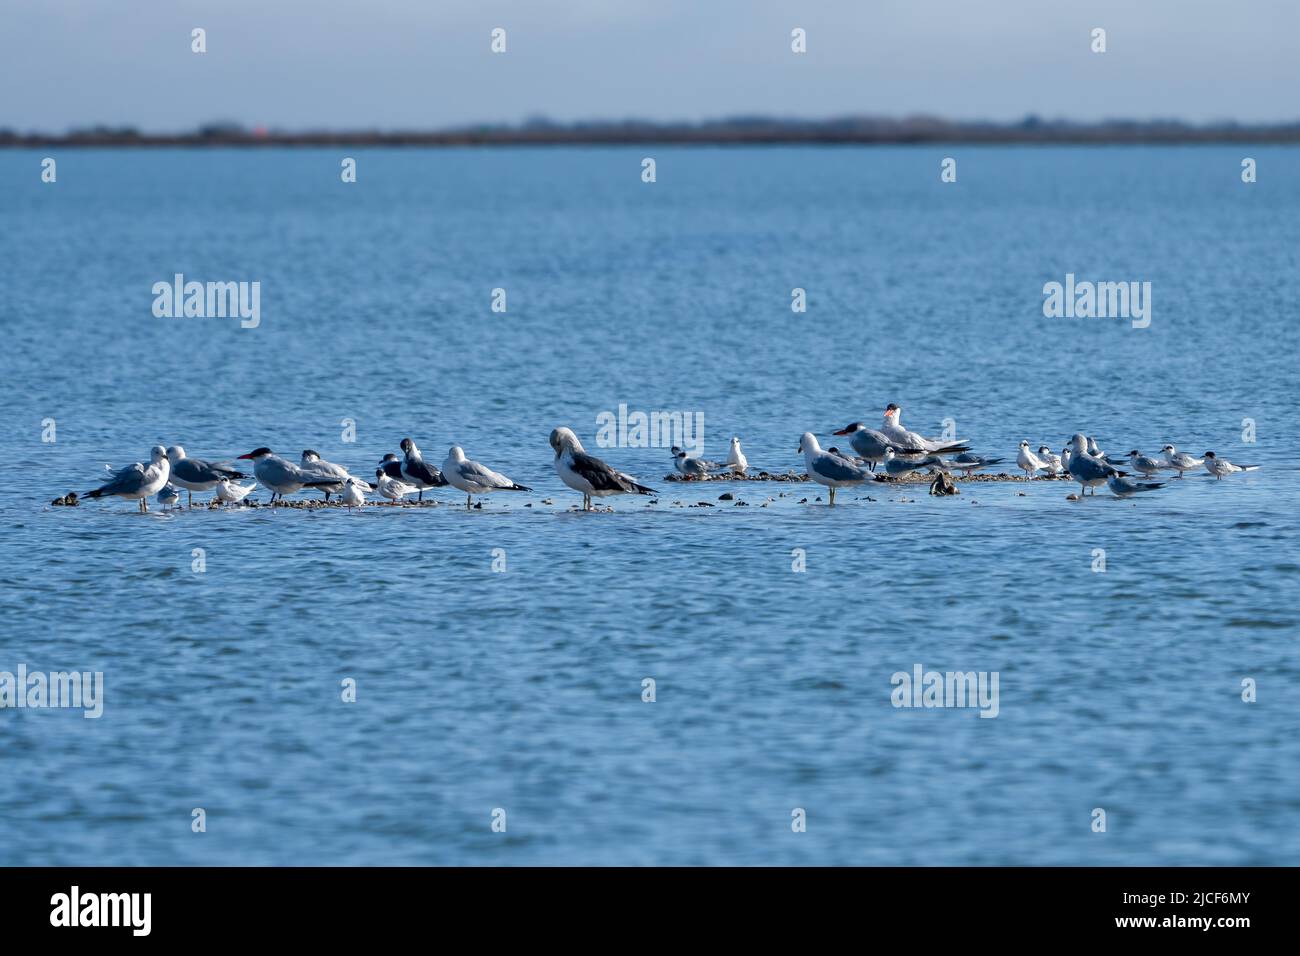 A mixed flock of gulls and terns on an oystershell island in the Aransas National Wildlife Refuge in Texas. Stock Photo